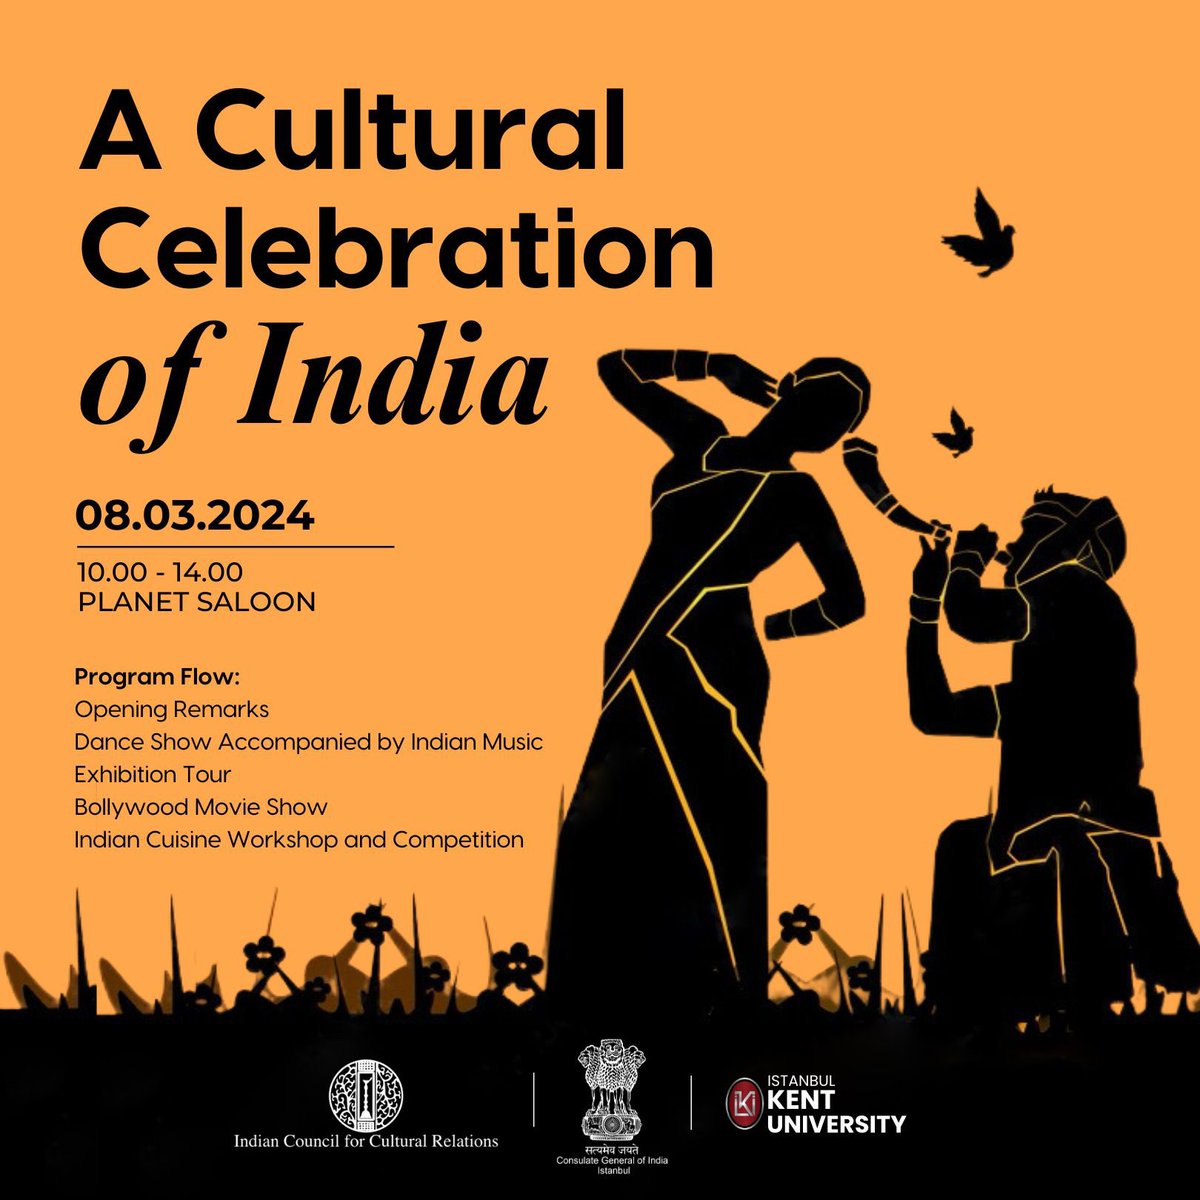 8 March: A day of festivities at Istanbul Kent University @istanbulkentedu with Bihu folk dance, films, Indian cuisine, and an exhibition commemorating International Women’s Day! @ICCRNewDelhi